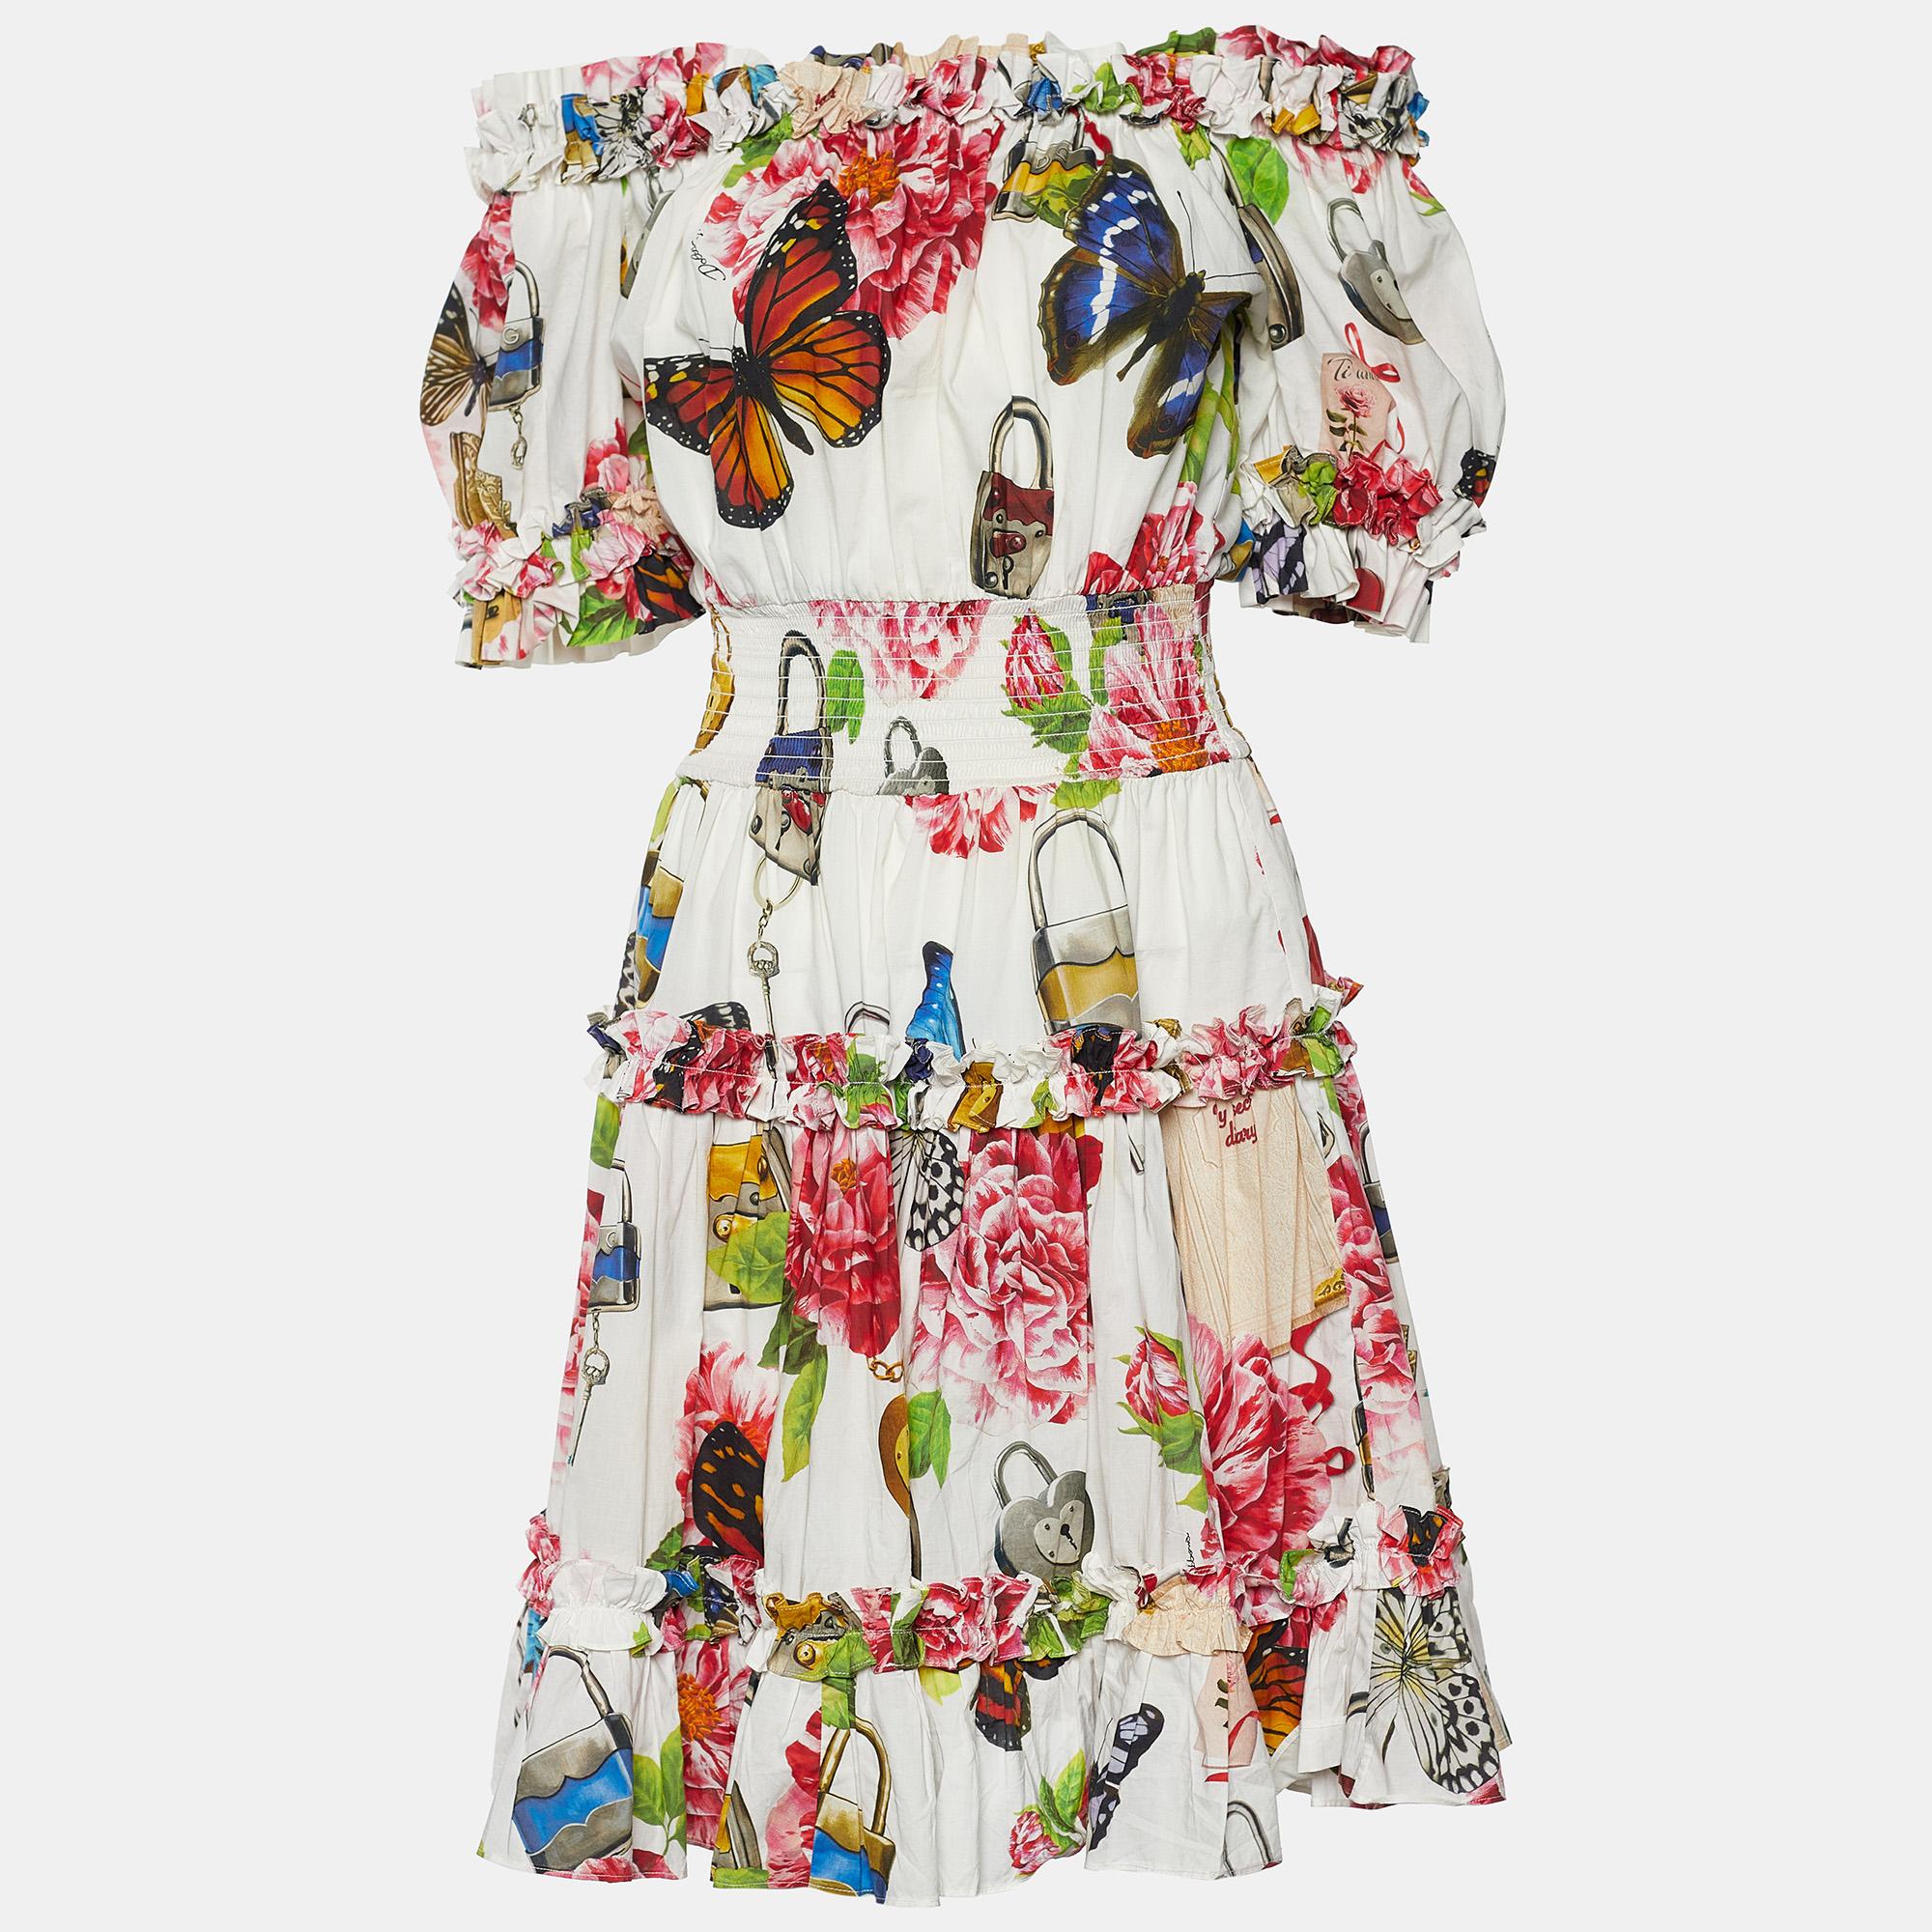 Feel summer-ready and chic with this dress from Dolce & Gabbana. Doused in multicolored padlock and garden prints, this midi dress is created from white cotton fabric. Featuring an off-shoulder silhouette, this dress is further beautified with short